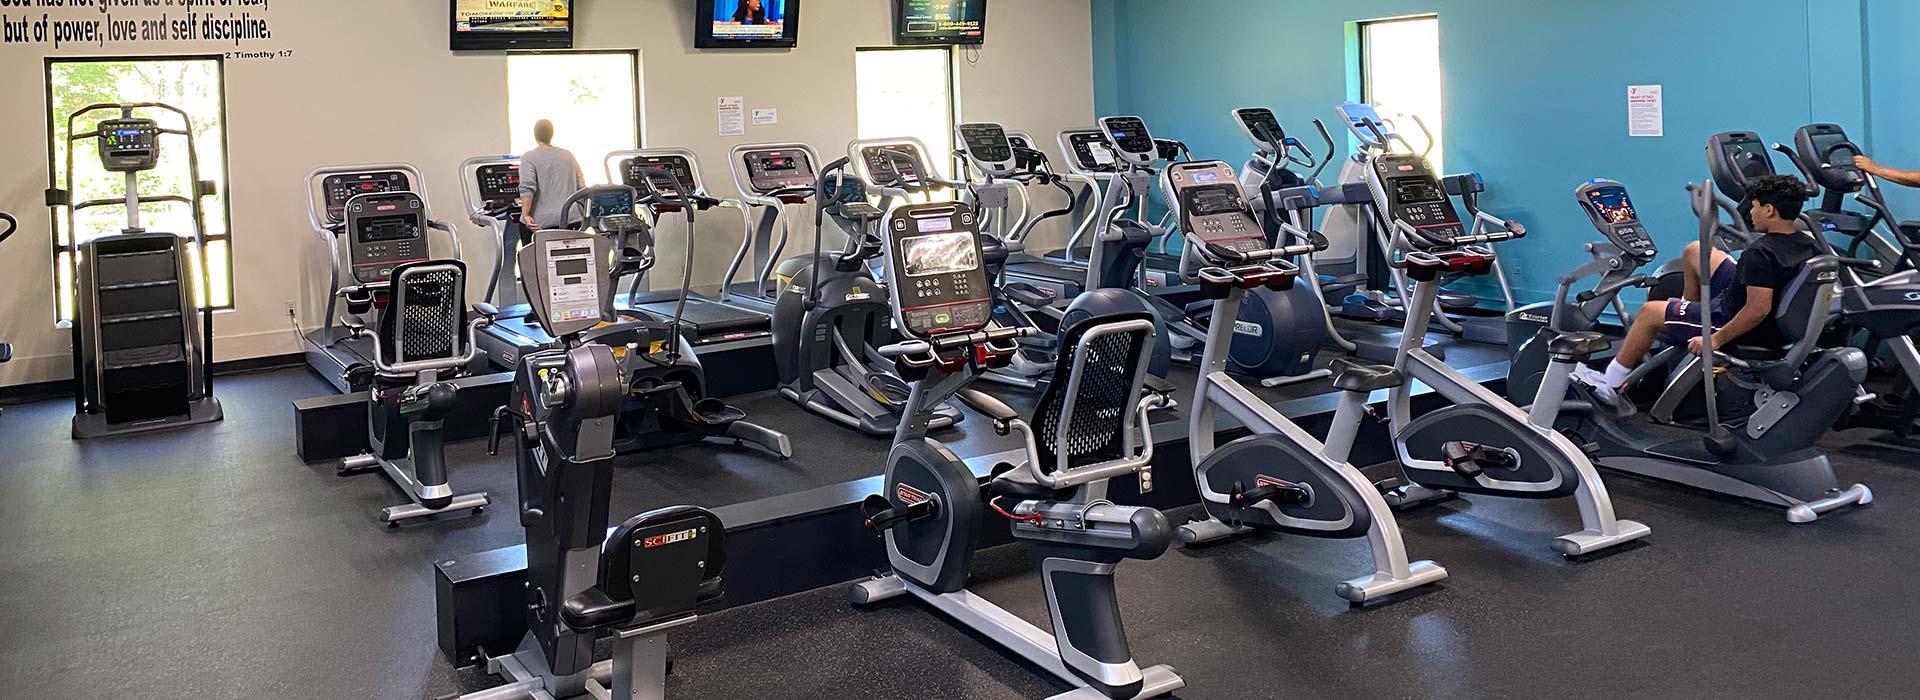 Cardio equipment in the fitness center of the YMCA of South Boston/Halifax County